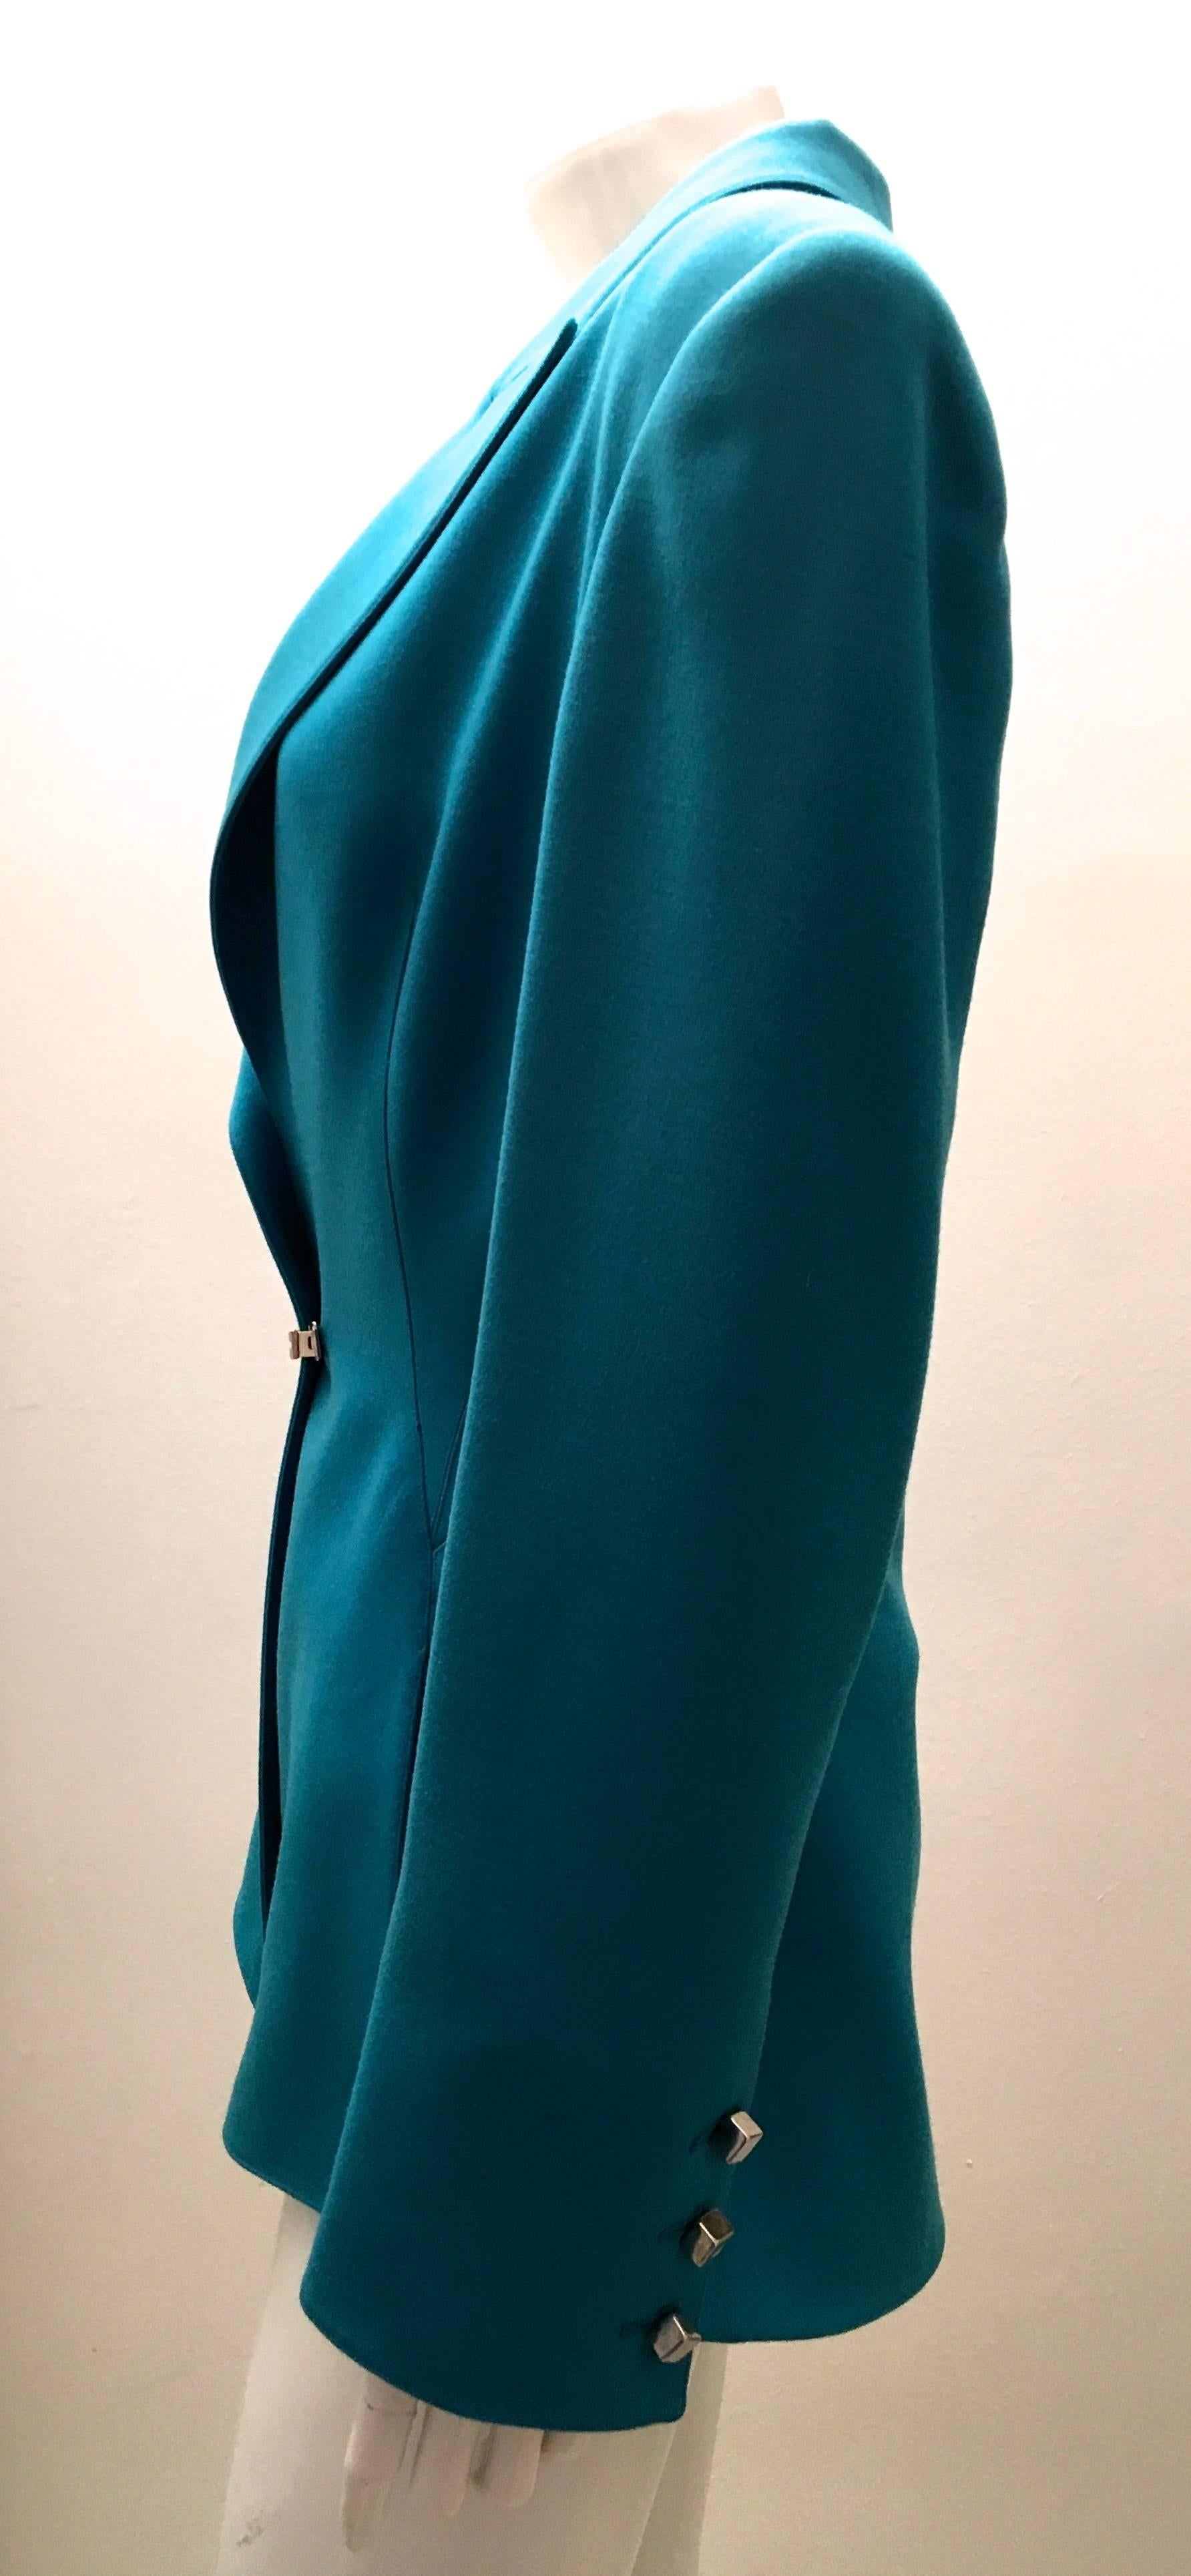 This Claude Montana turquoise blazer is an absolute gem. The label reads Claude Montana - Paris. It is listed as a 40 / size 6. This is Claude Montana at his finest with the beautiful structural seams of the jacket. They make this a beautiful